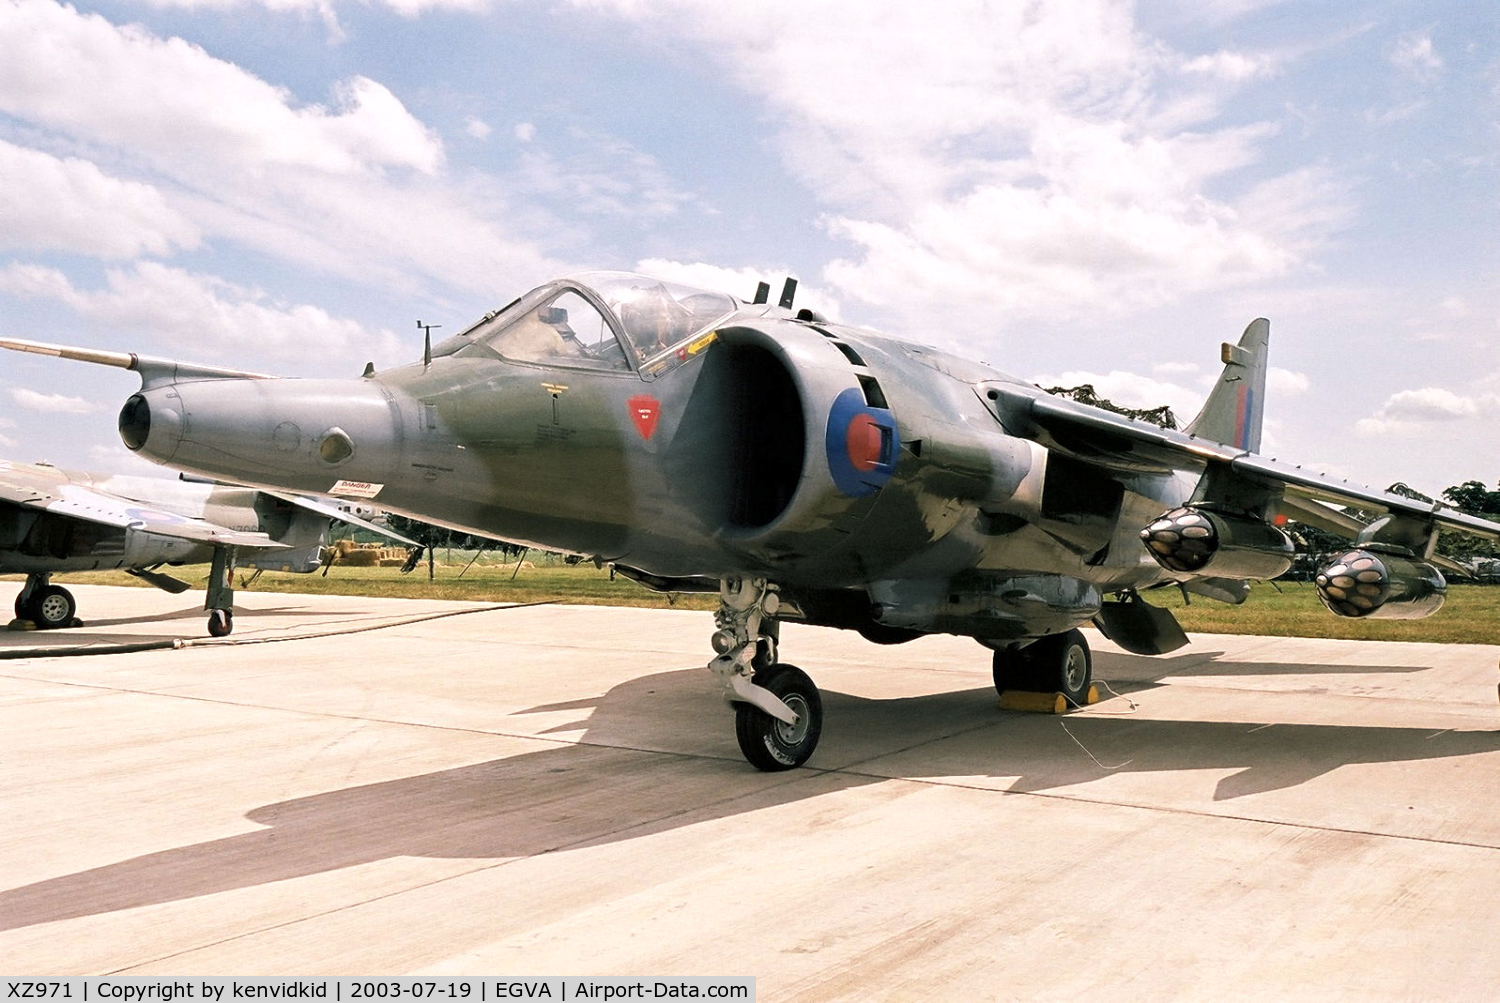 XZ971, 1981 British Aerospace Harrier GR.3 C/N 712207, In the 100 Years of Flight enclave at RIAT.